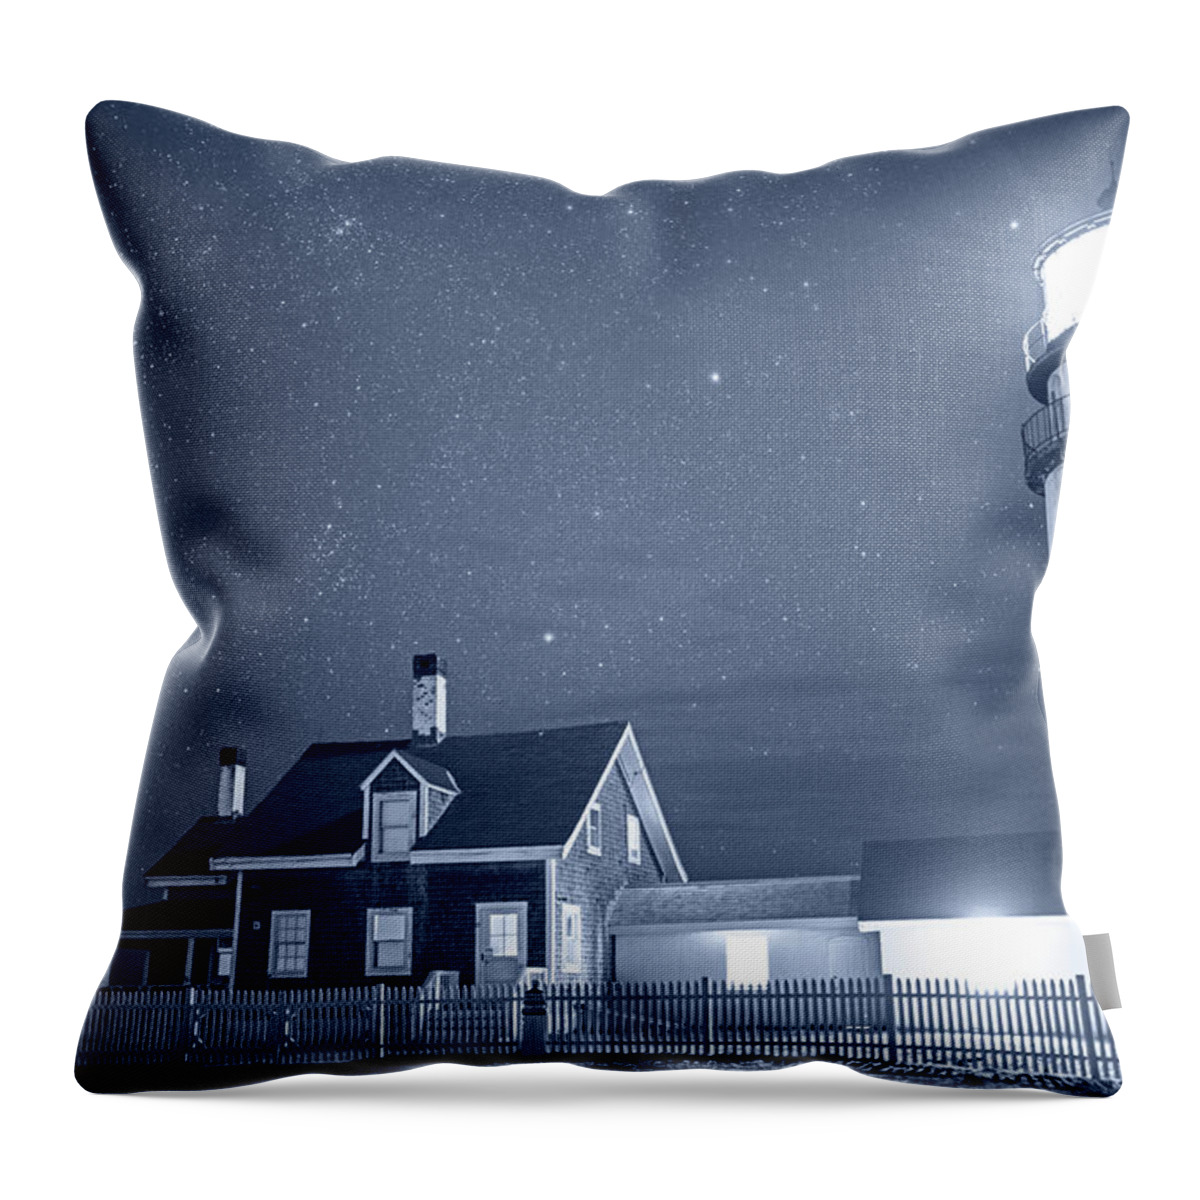 Truro Throw Pillow featuring the photograph Monochrome Blue Nights Highland Light Truro Massachusetts Cape Cod Starry Sky by Toby McGuire